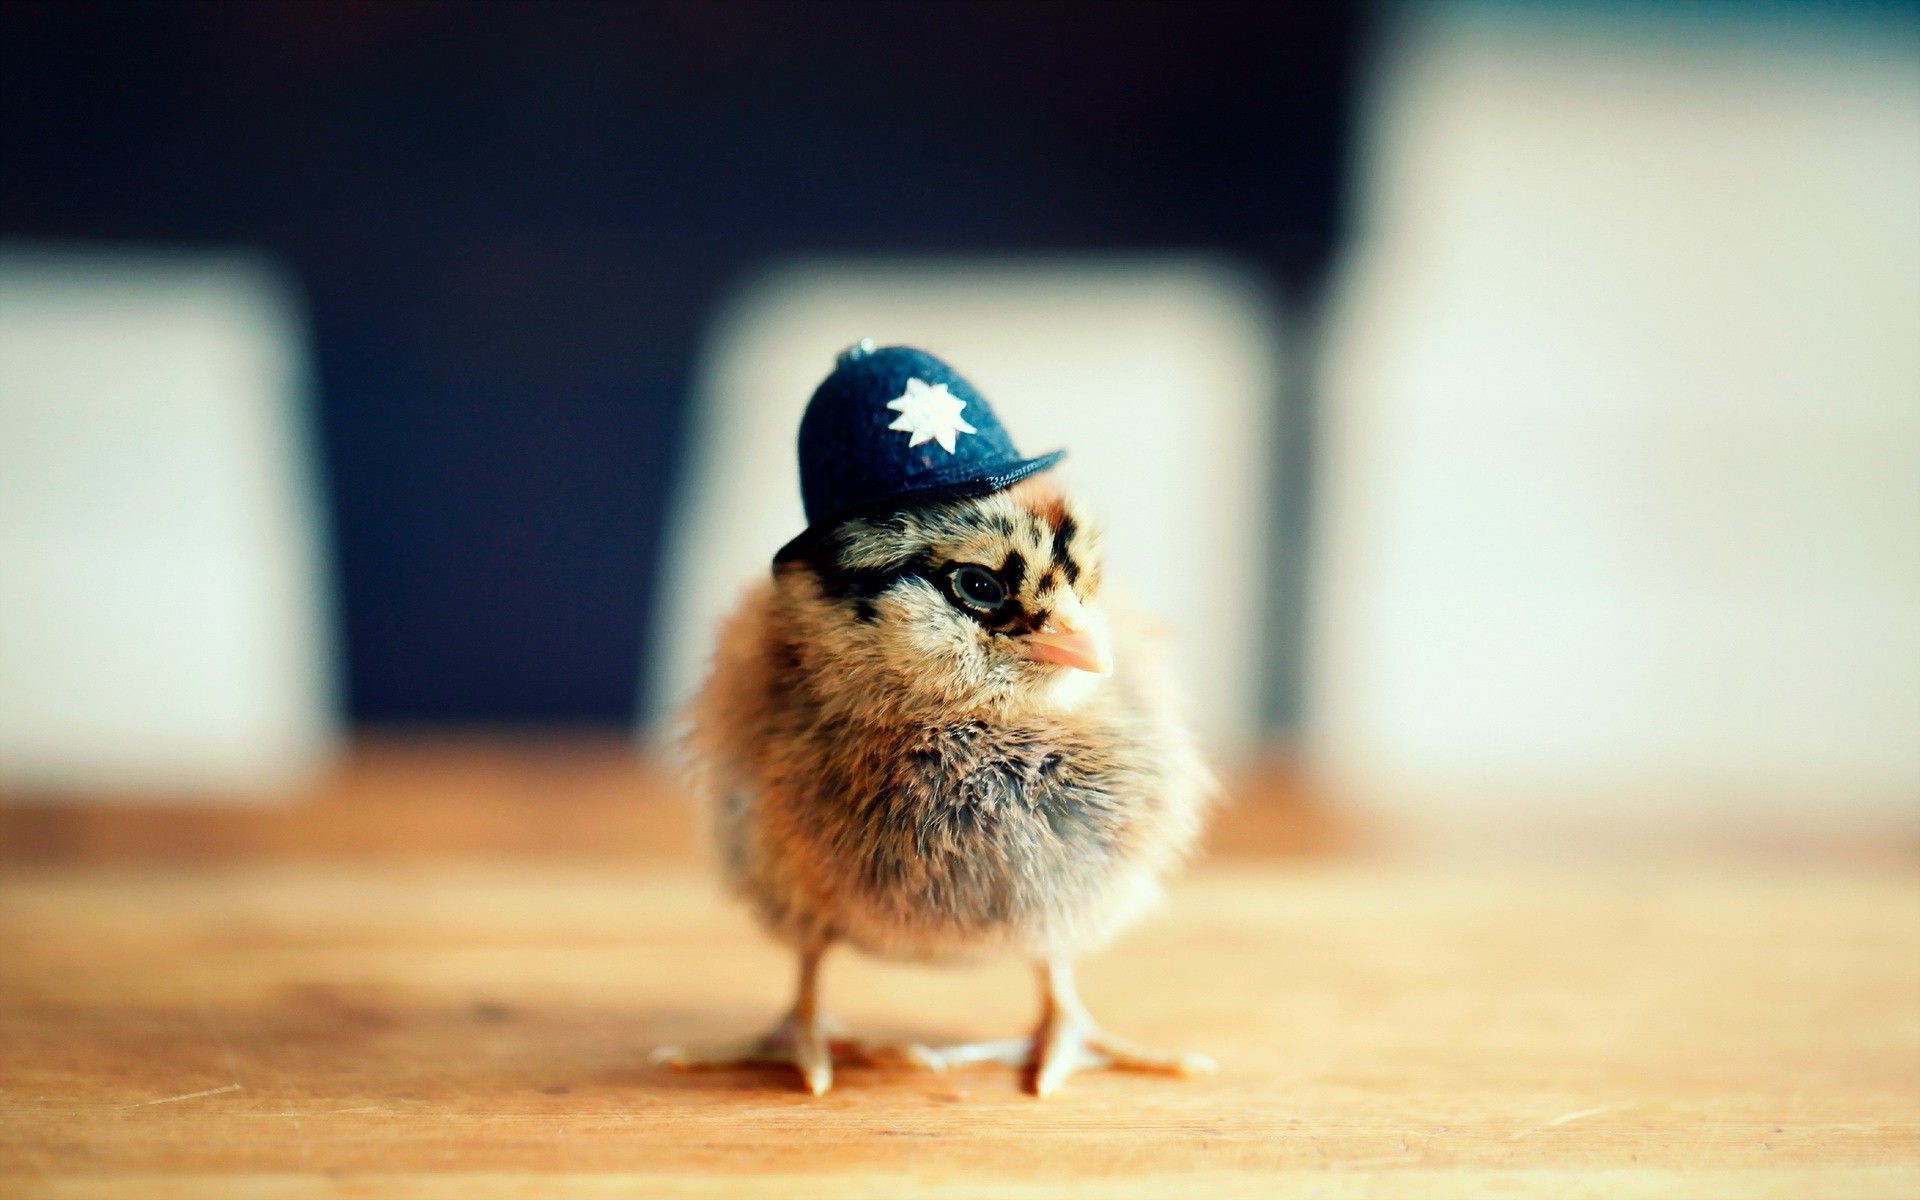 Police Chick Wallpaper - Bird With Police Hat - HD Wallpaper 